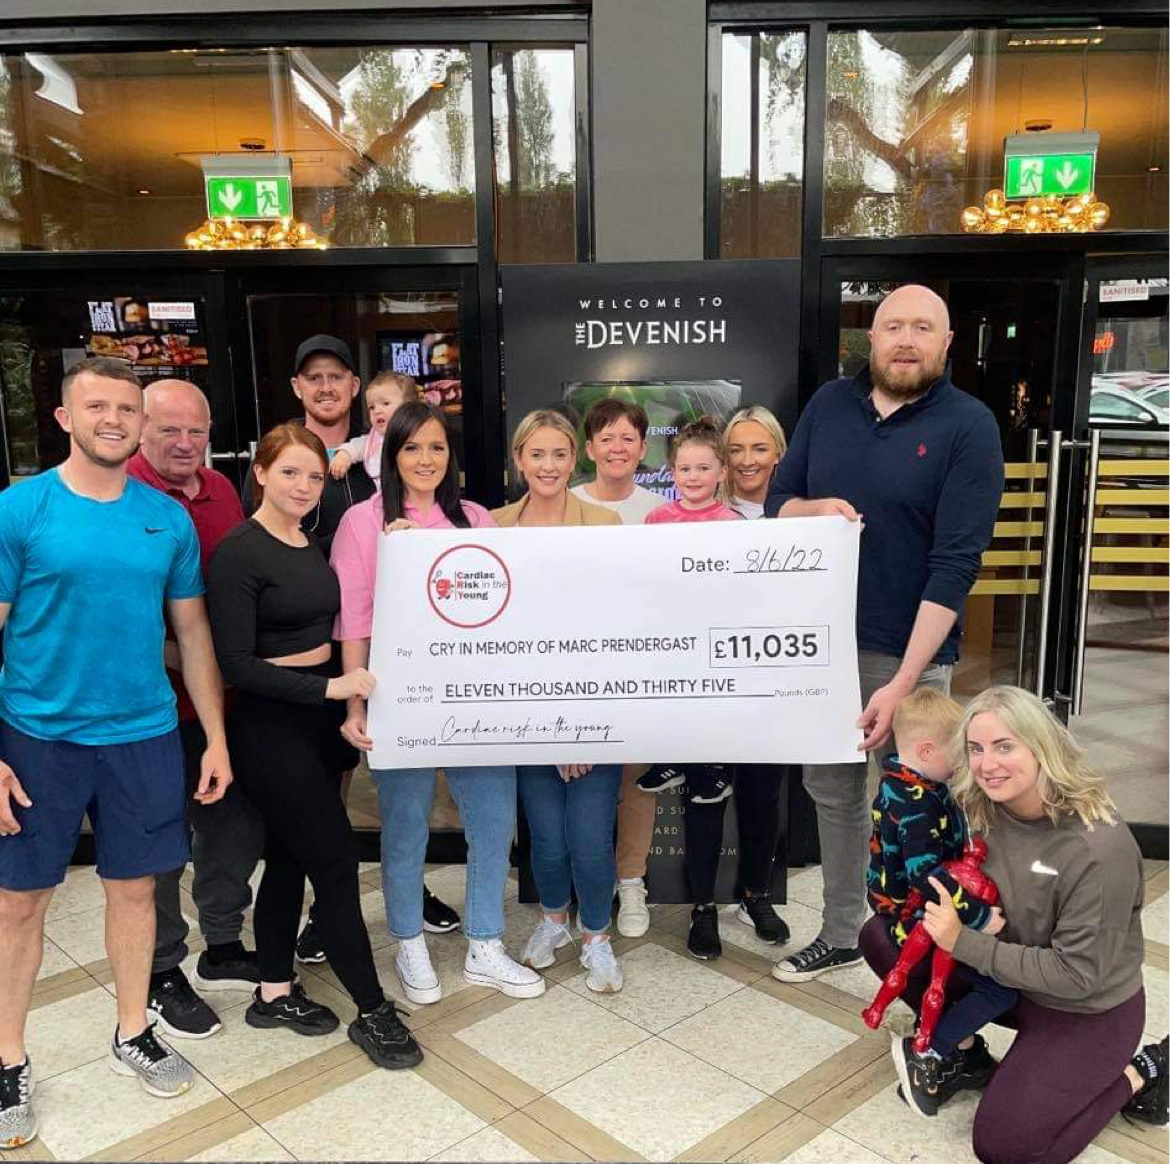 CHEQUE PRESENTATION: Family and friends of Marc Prendergast raised £11,035 for Cardiac Risk in the Young